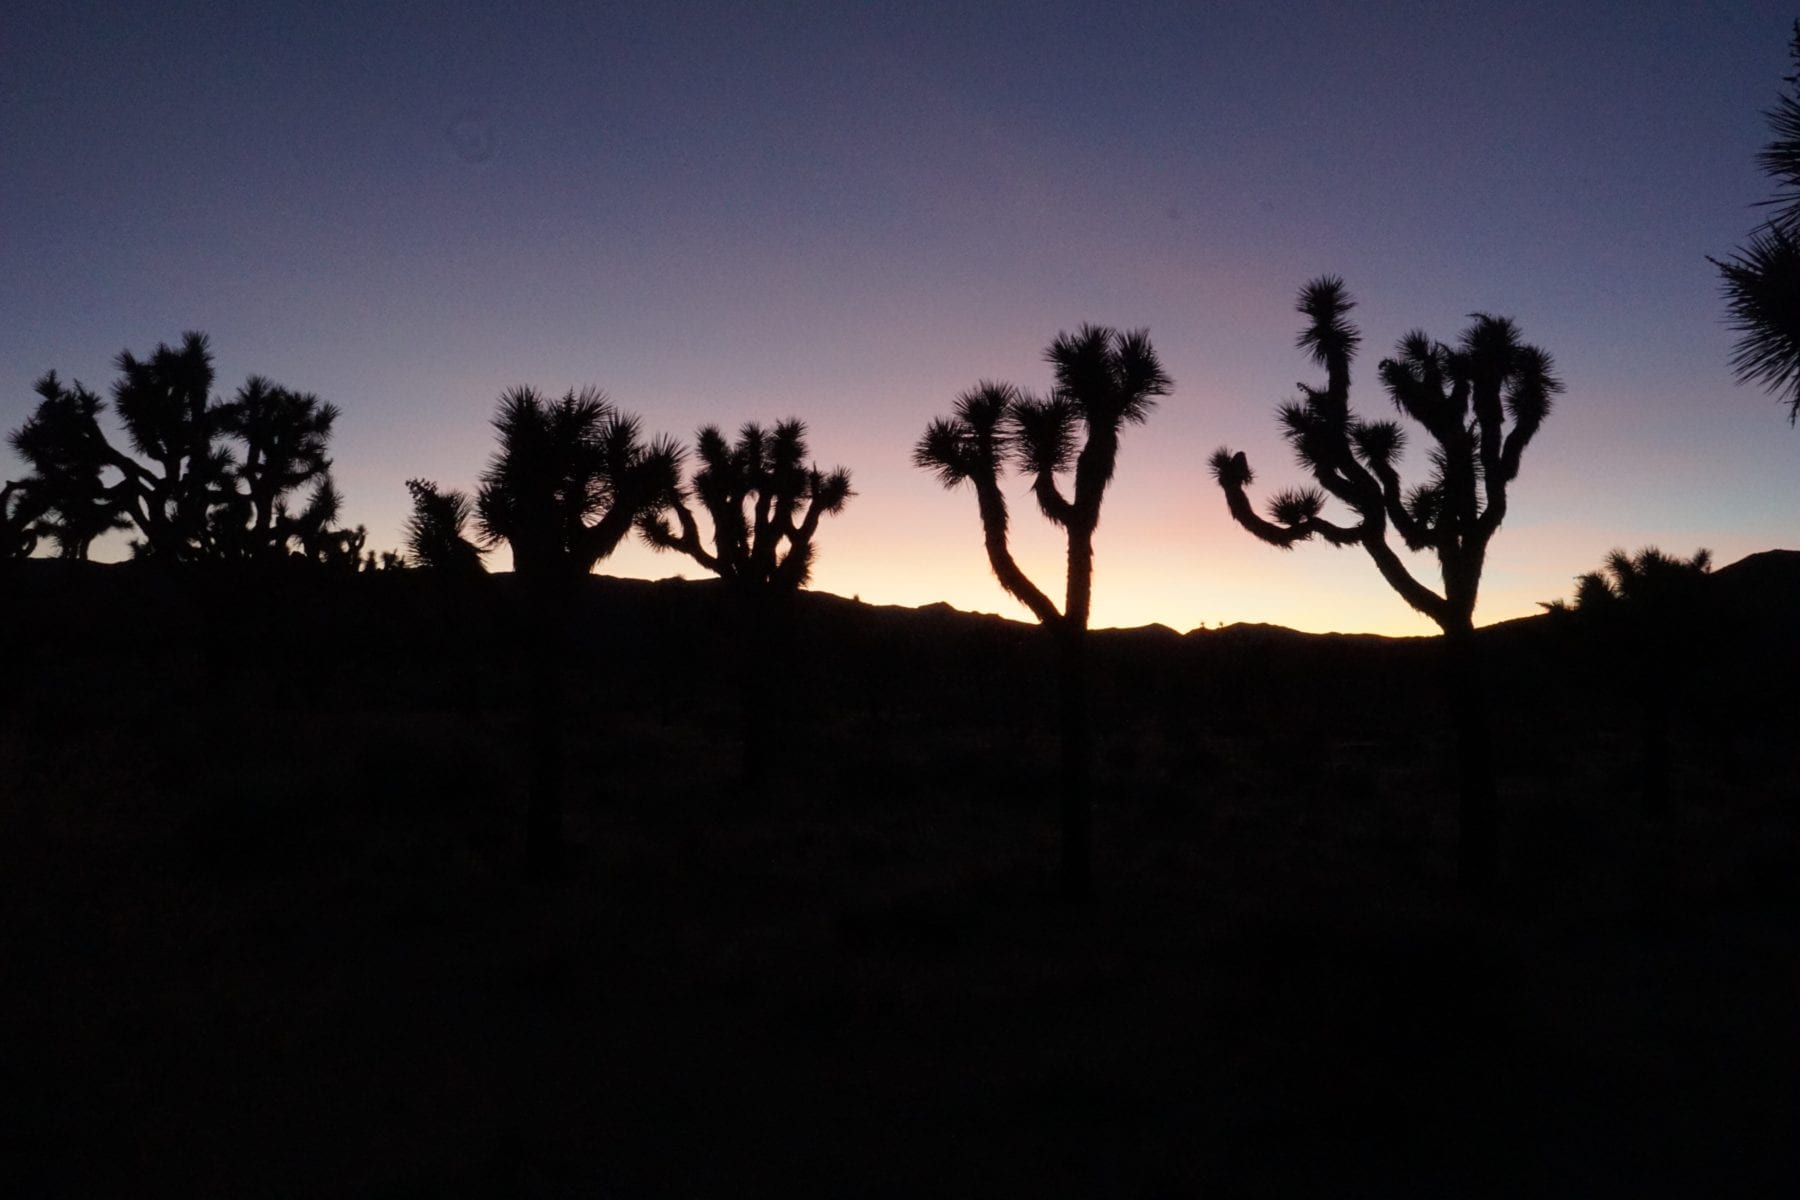 Joshua Trees in the Sunset